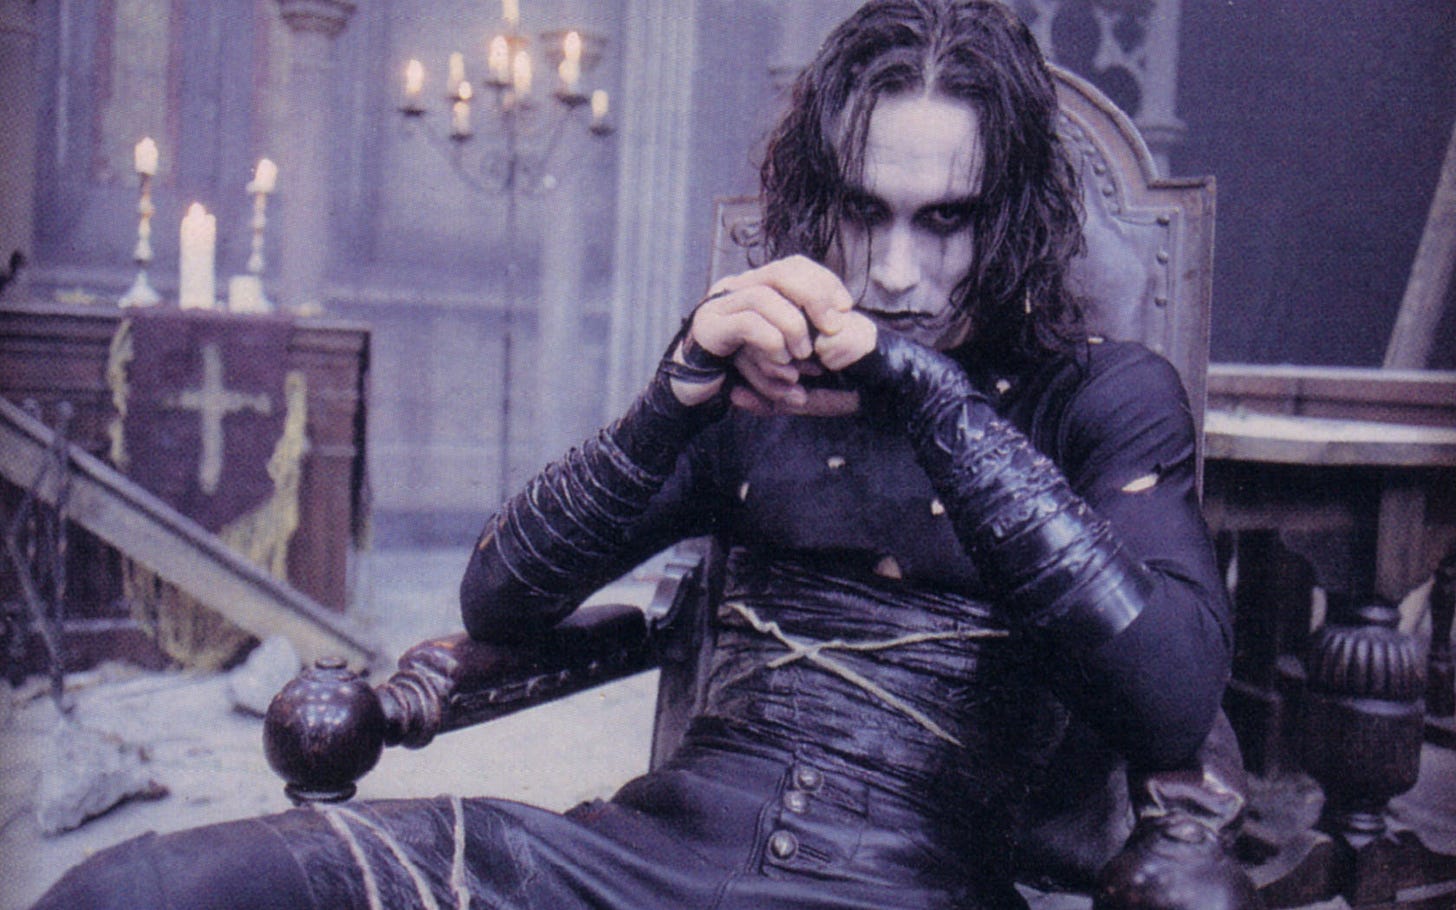 Revisiting The Crow - The Movie Elite